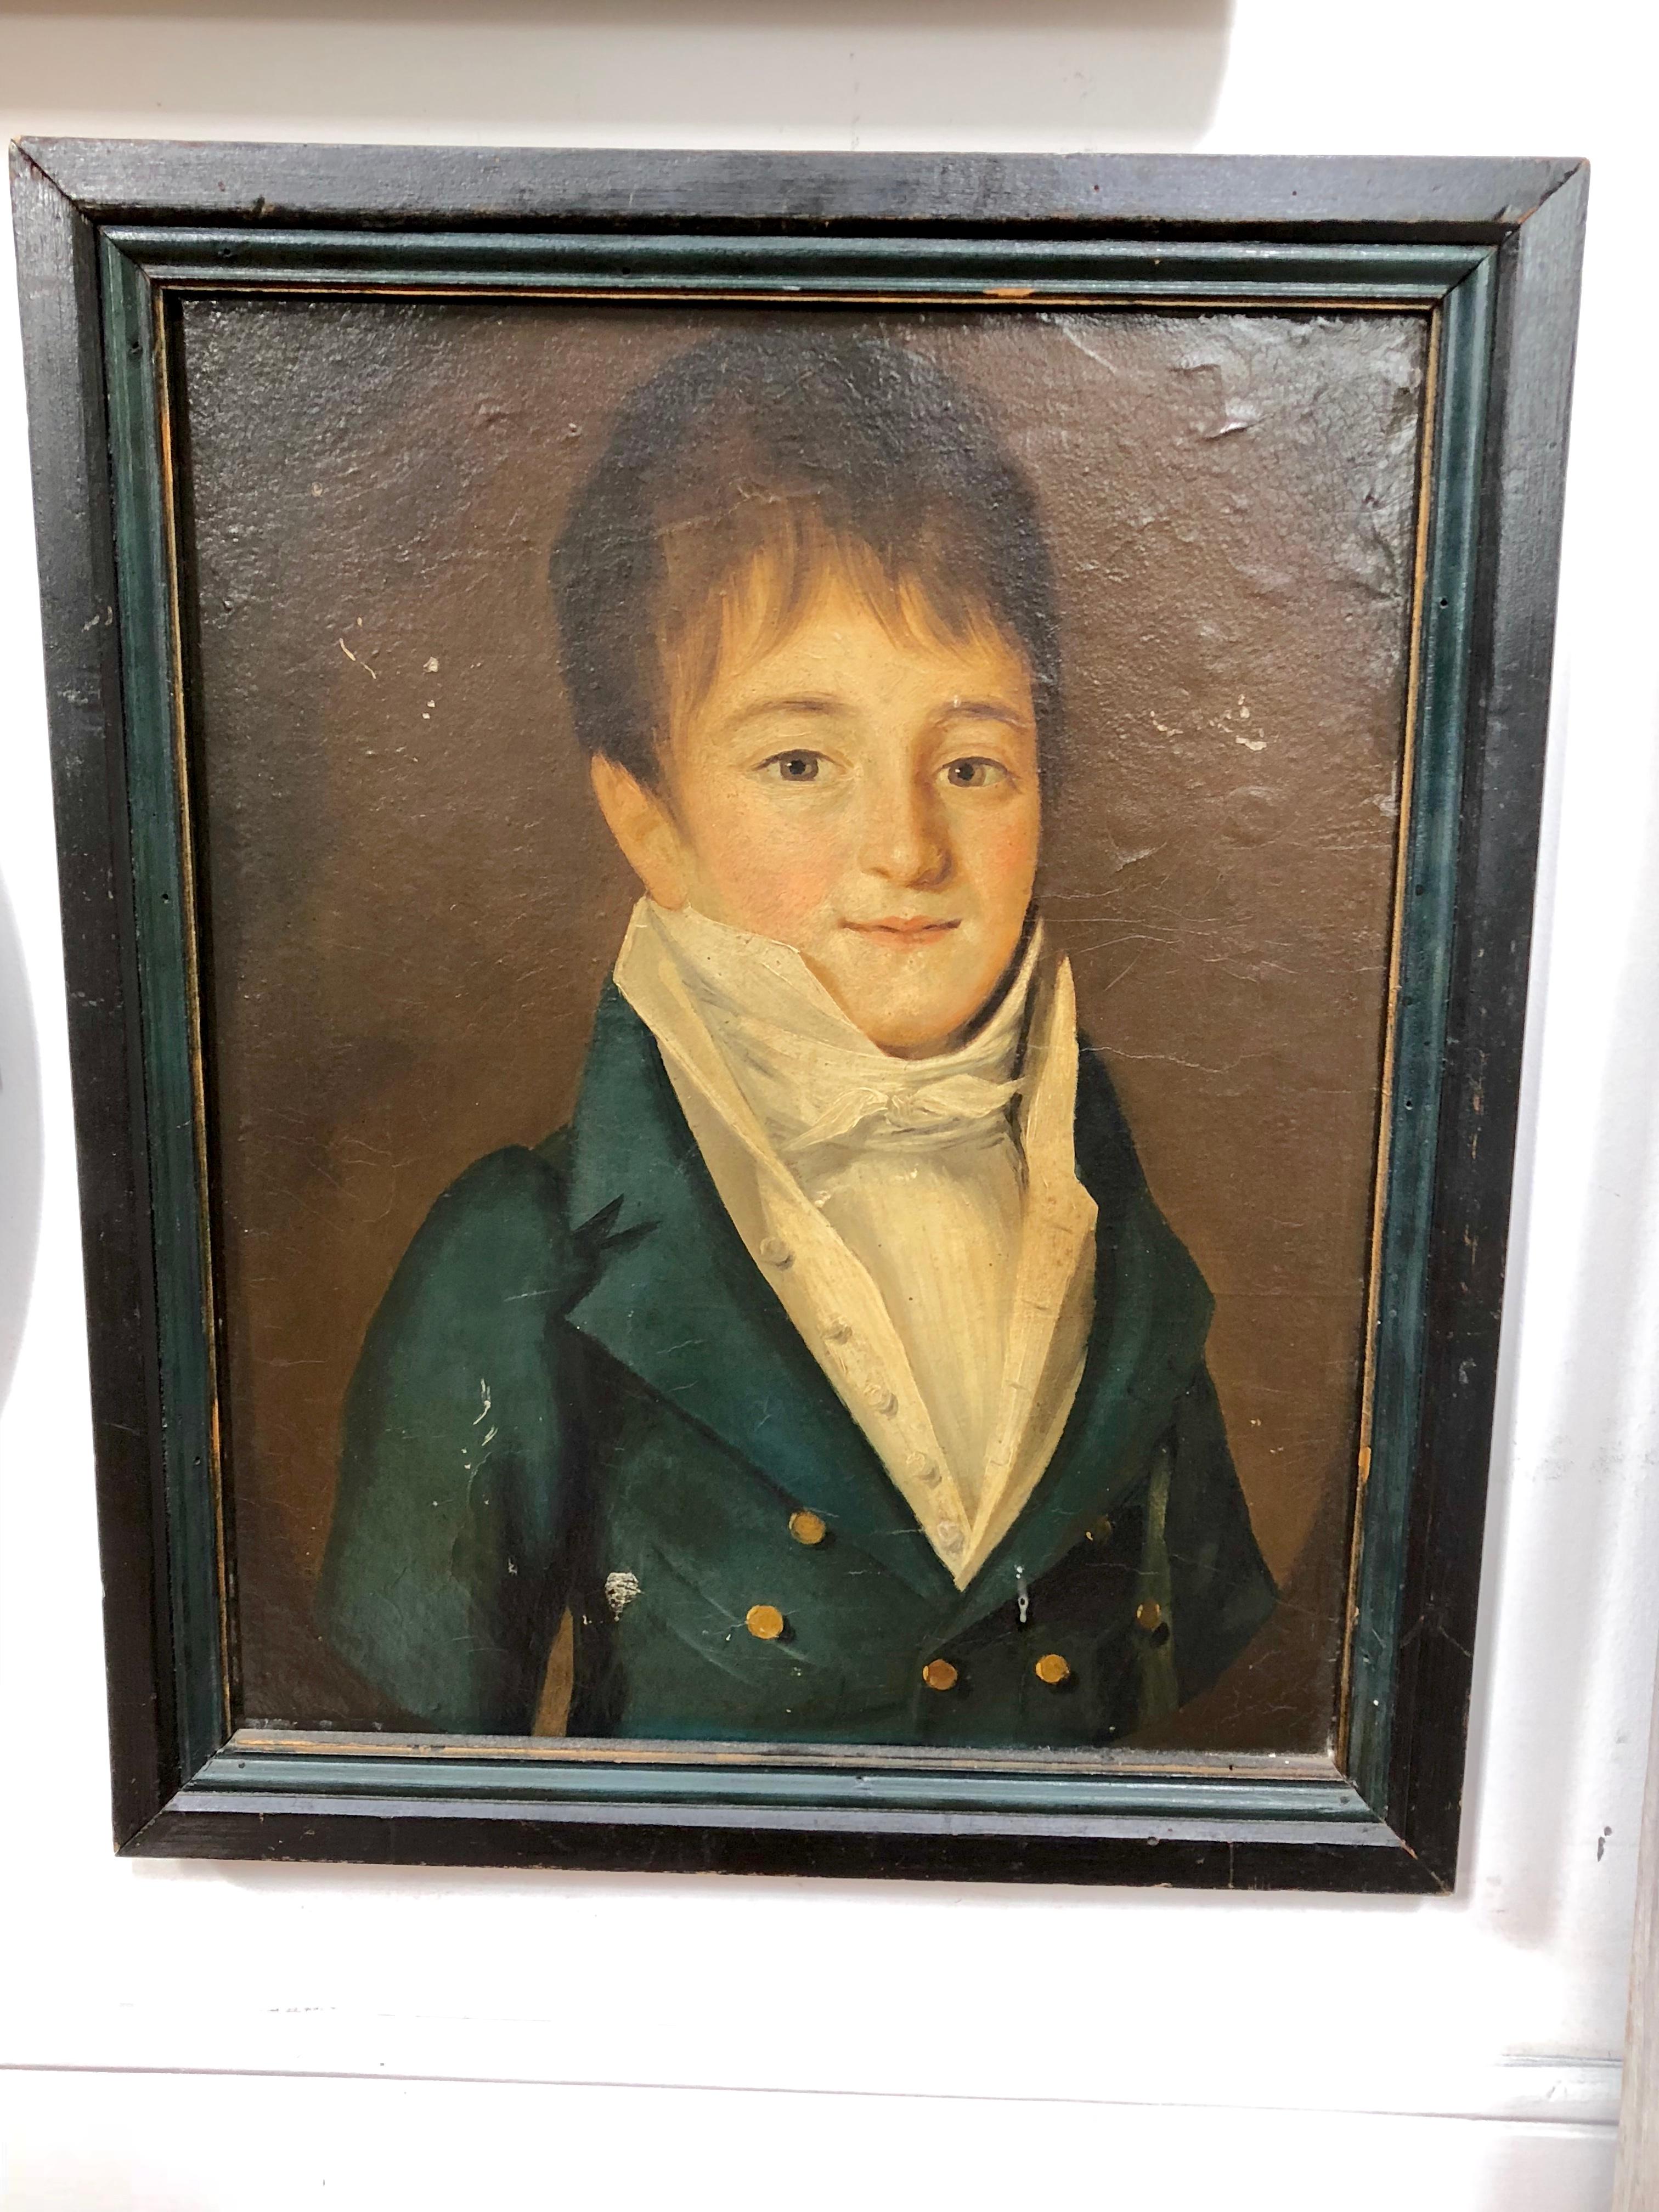 A French Empire period portrait of a young boy, oil on canvas, circa 1800, in original painted frame.